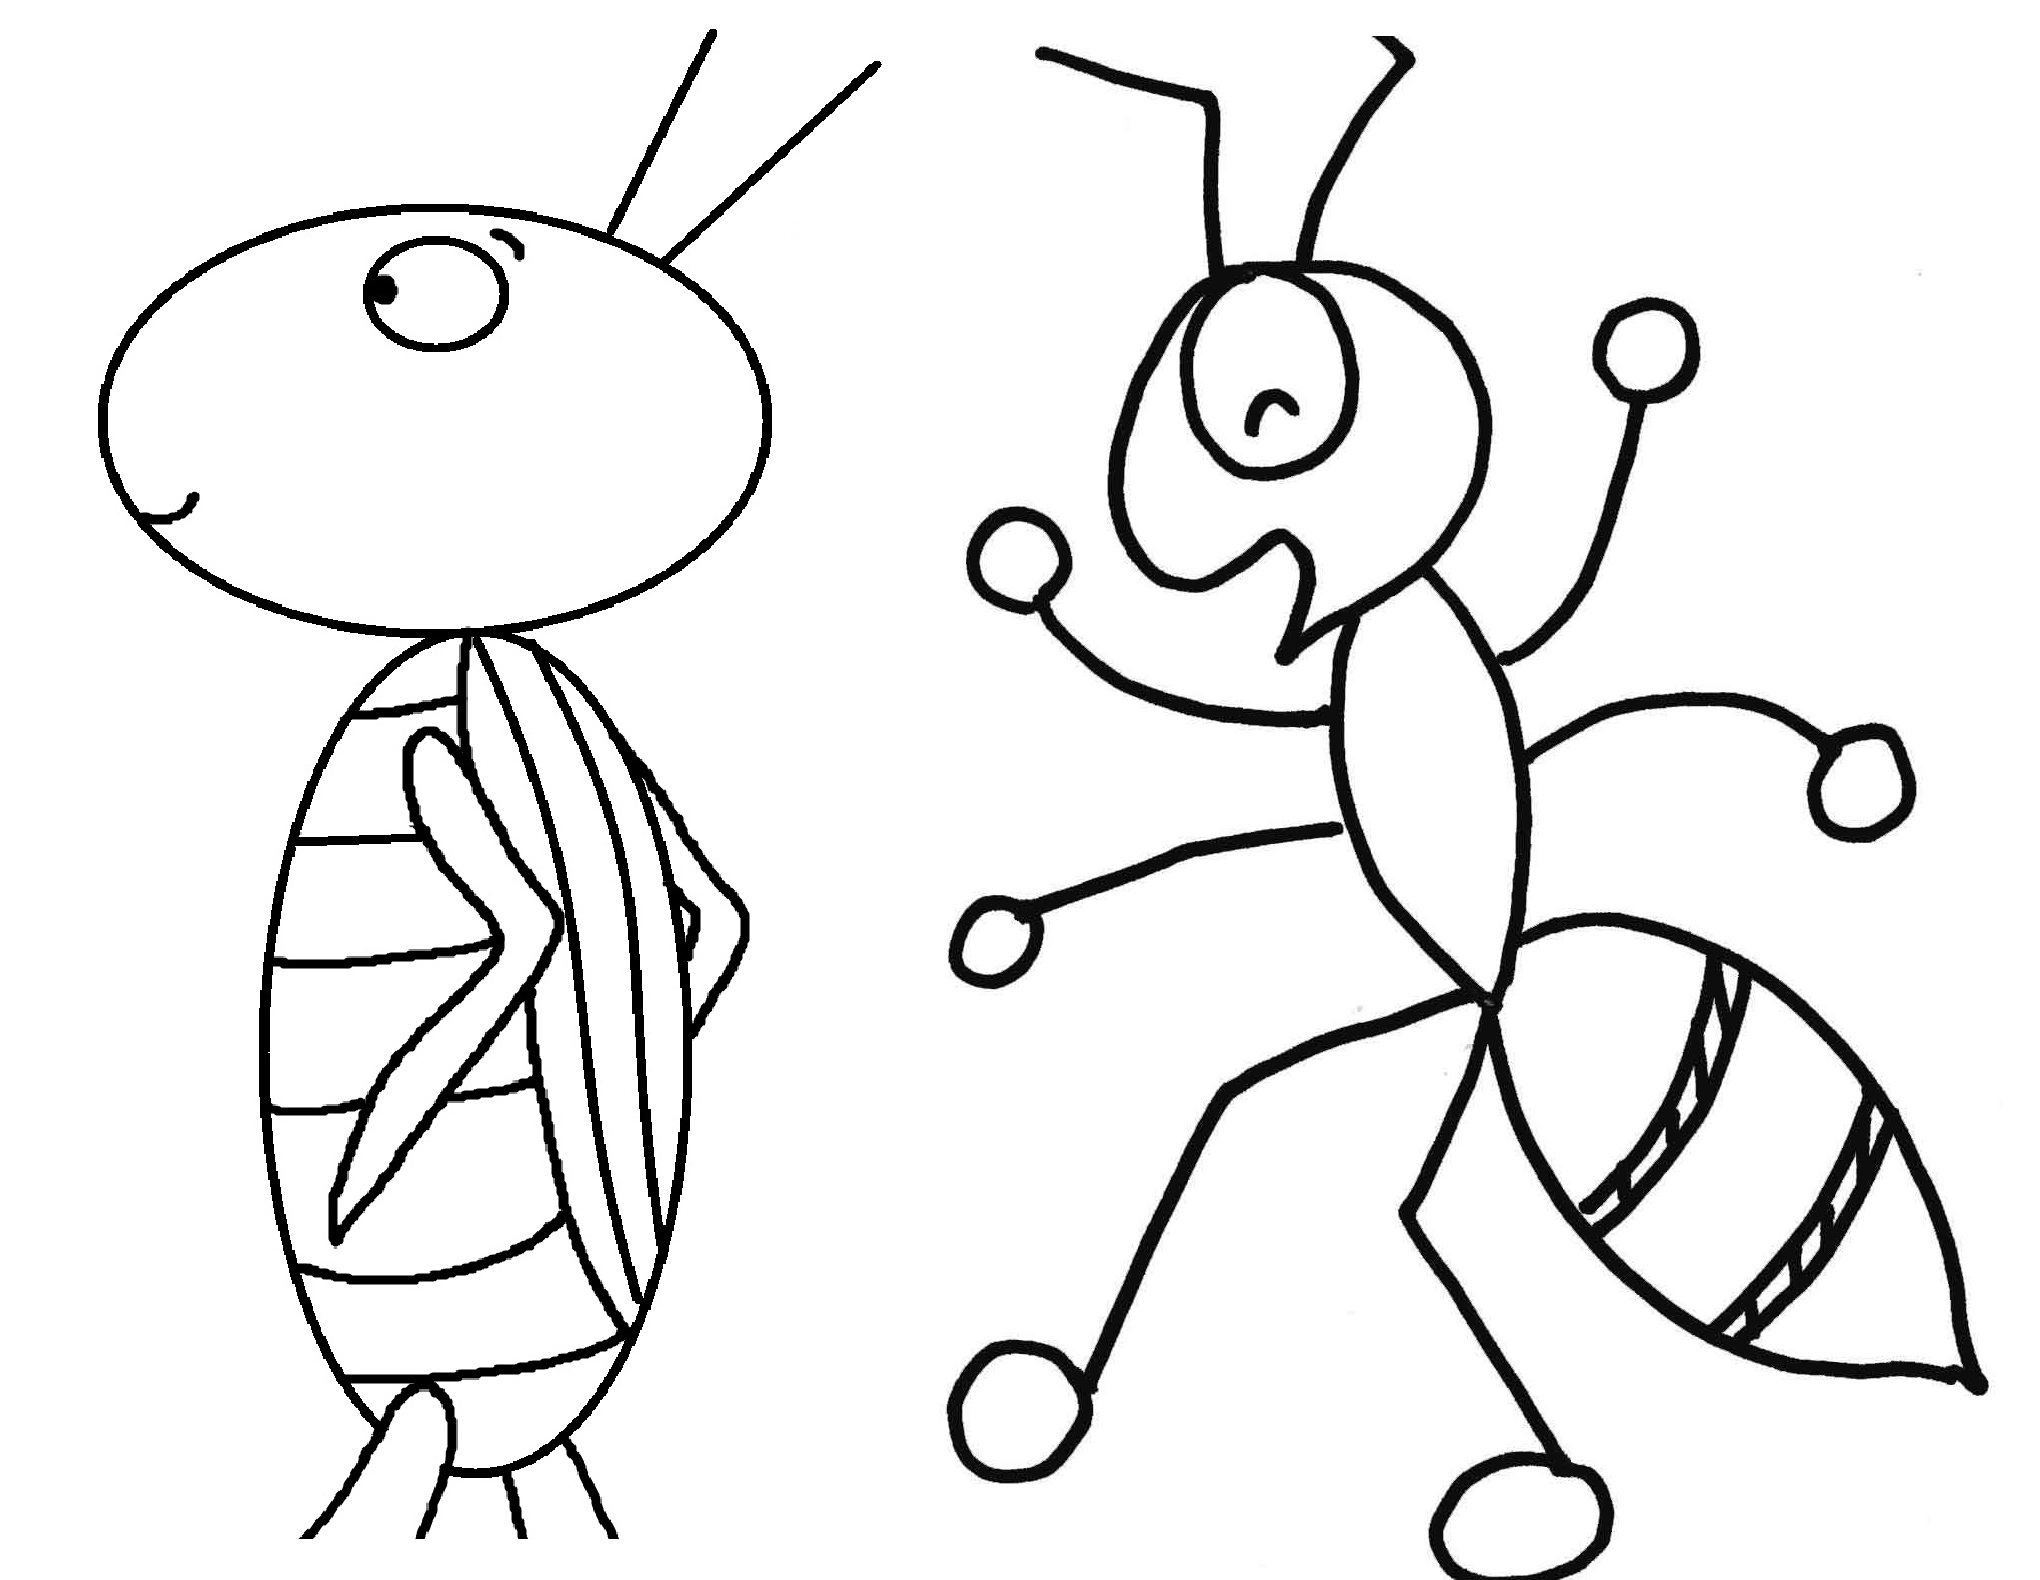 Ant coloring #16, Download drawings